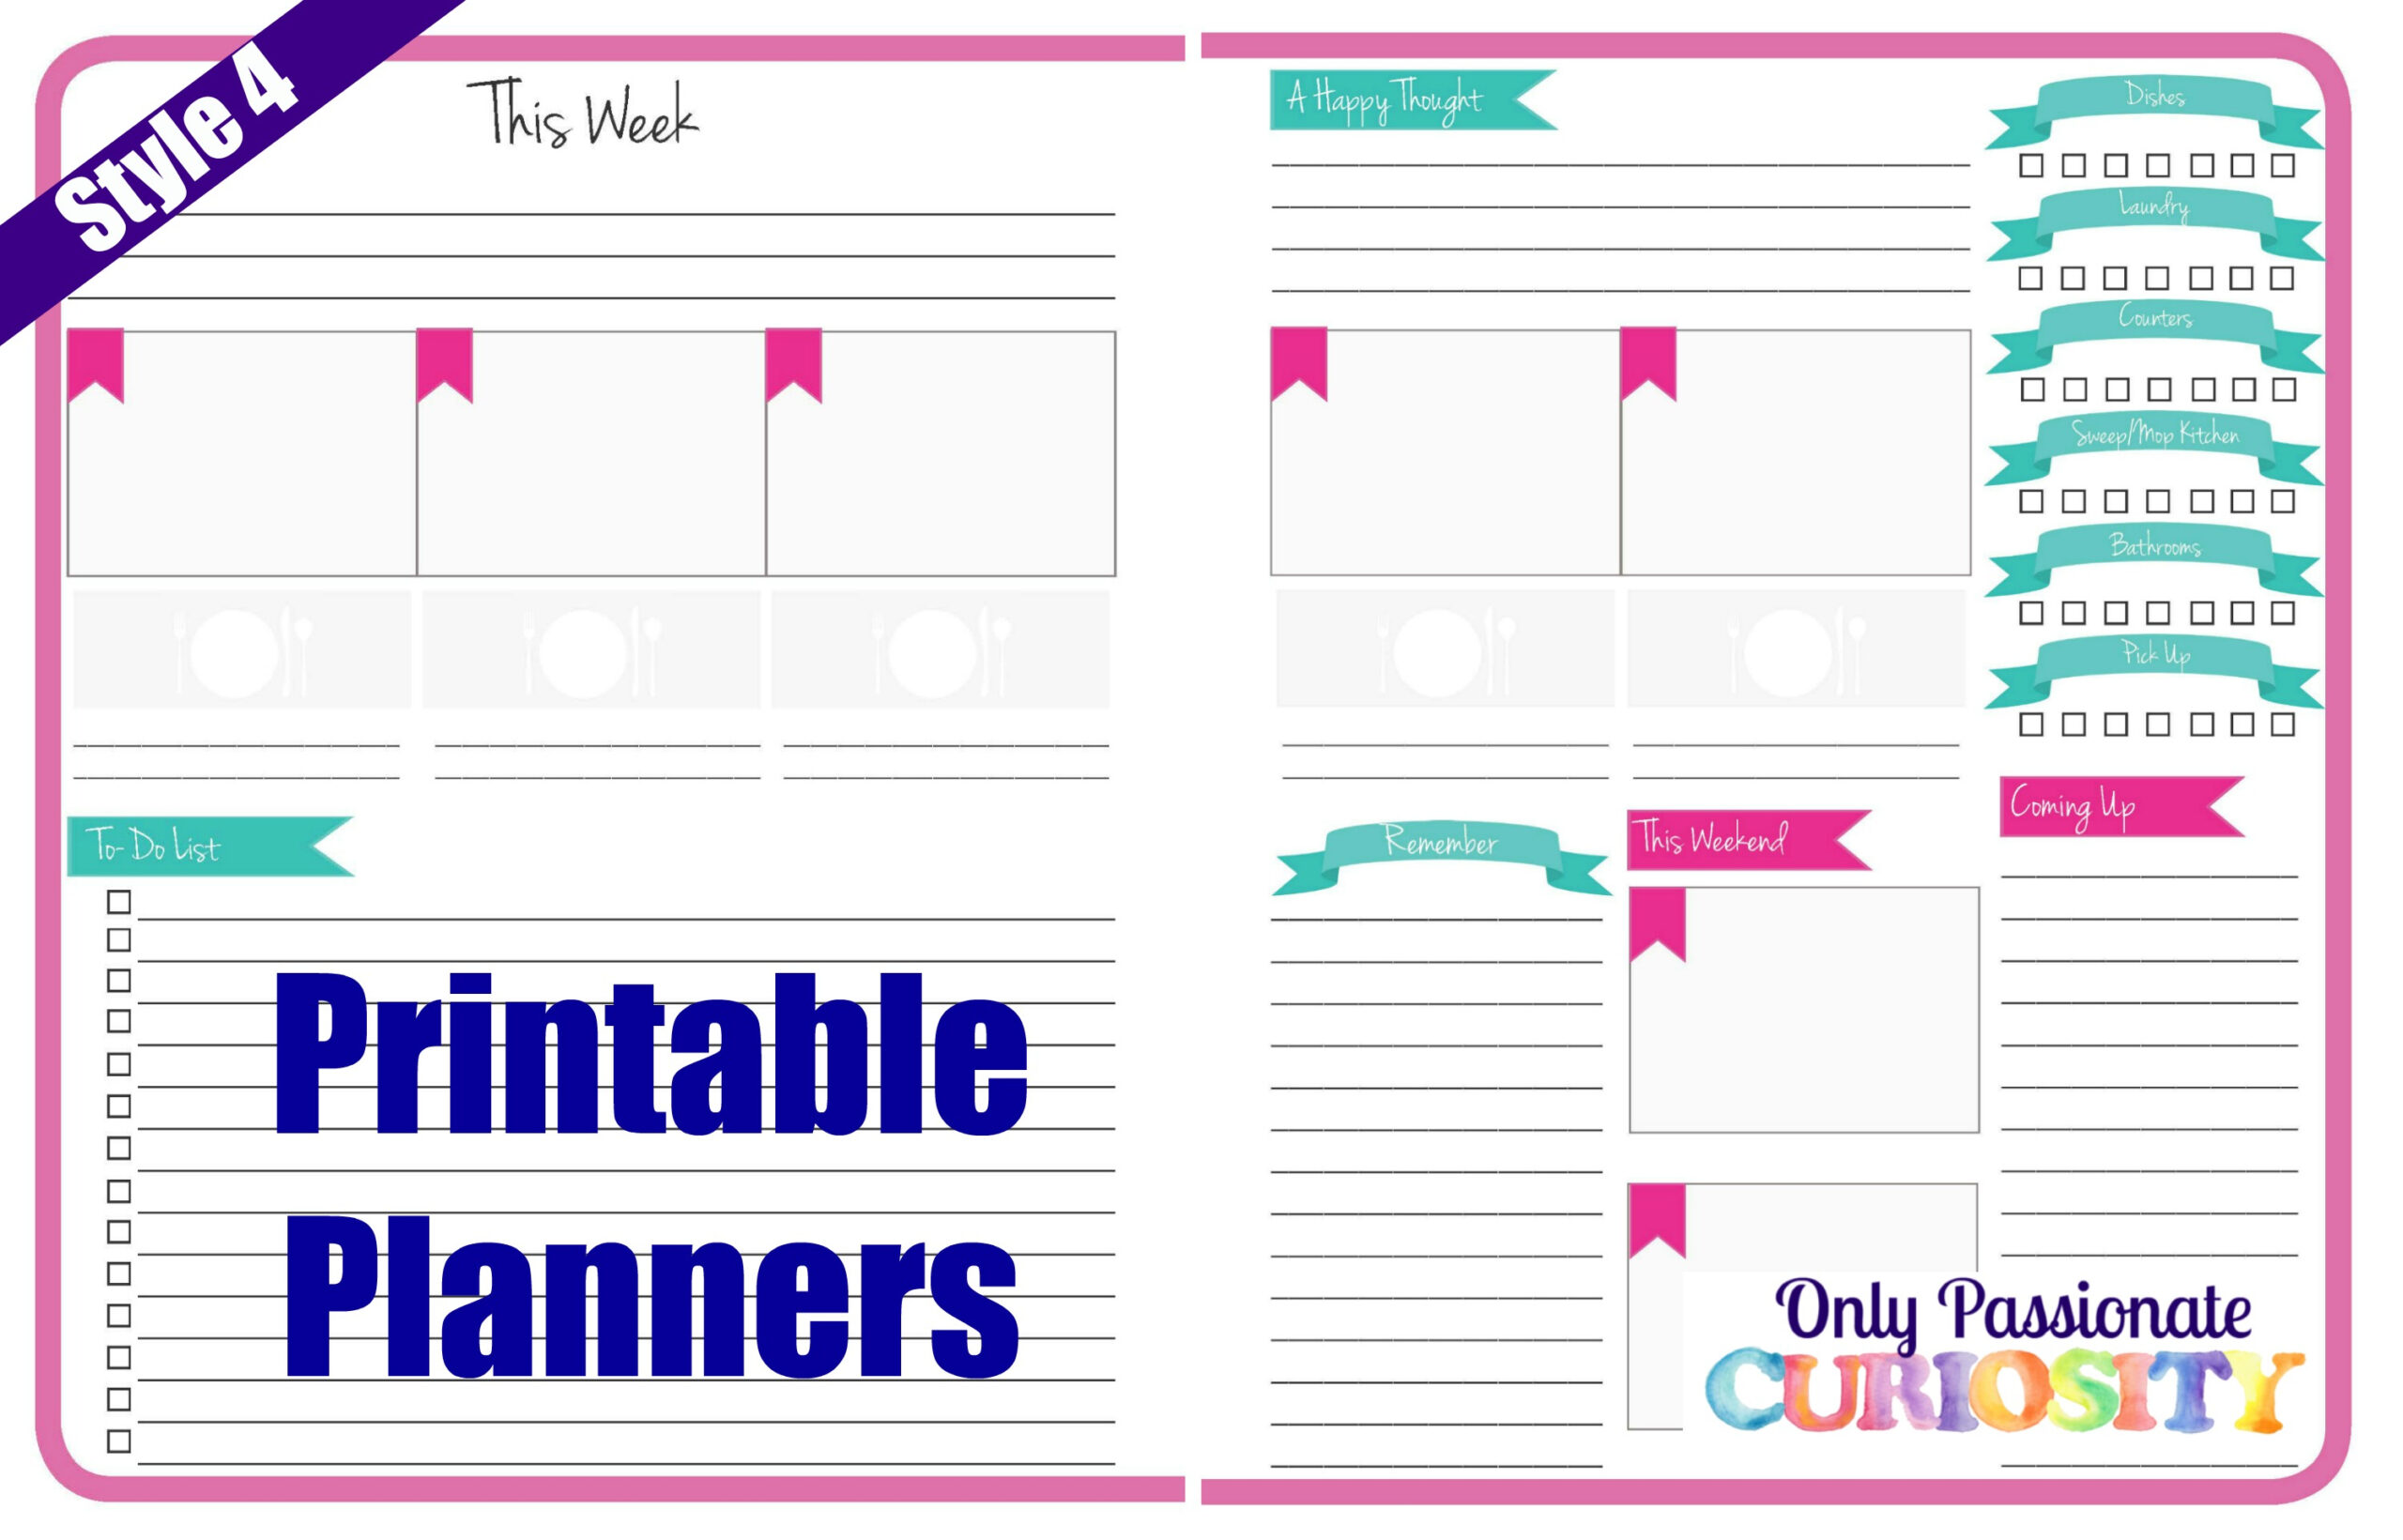 Easy To Print Planner Style 4 - Only Passionate Curiosity